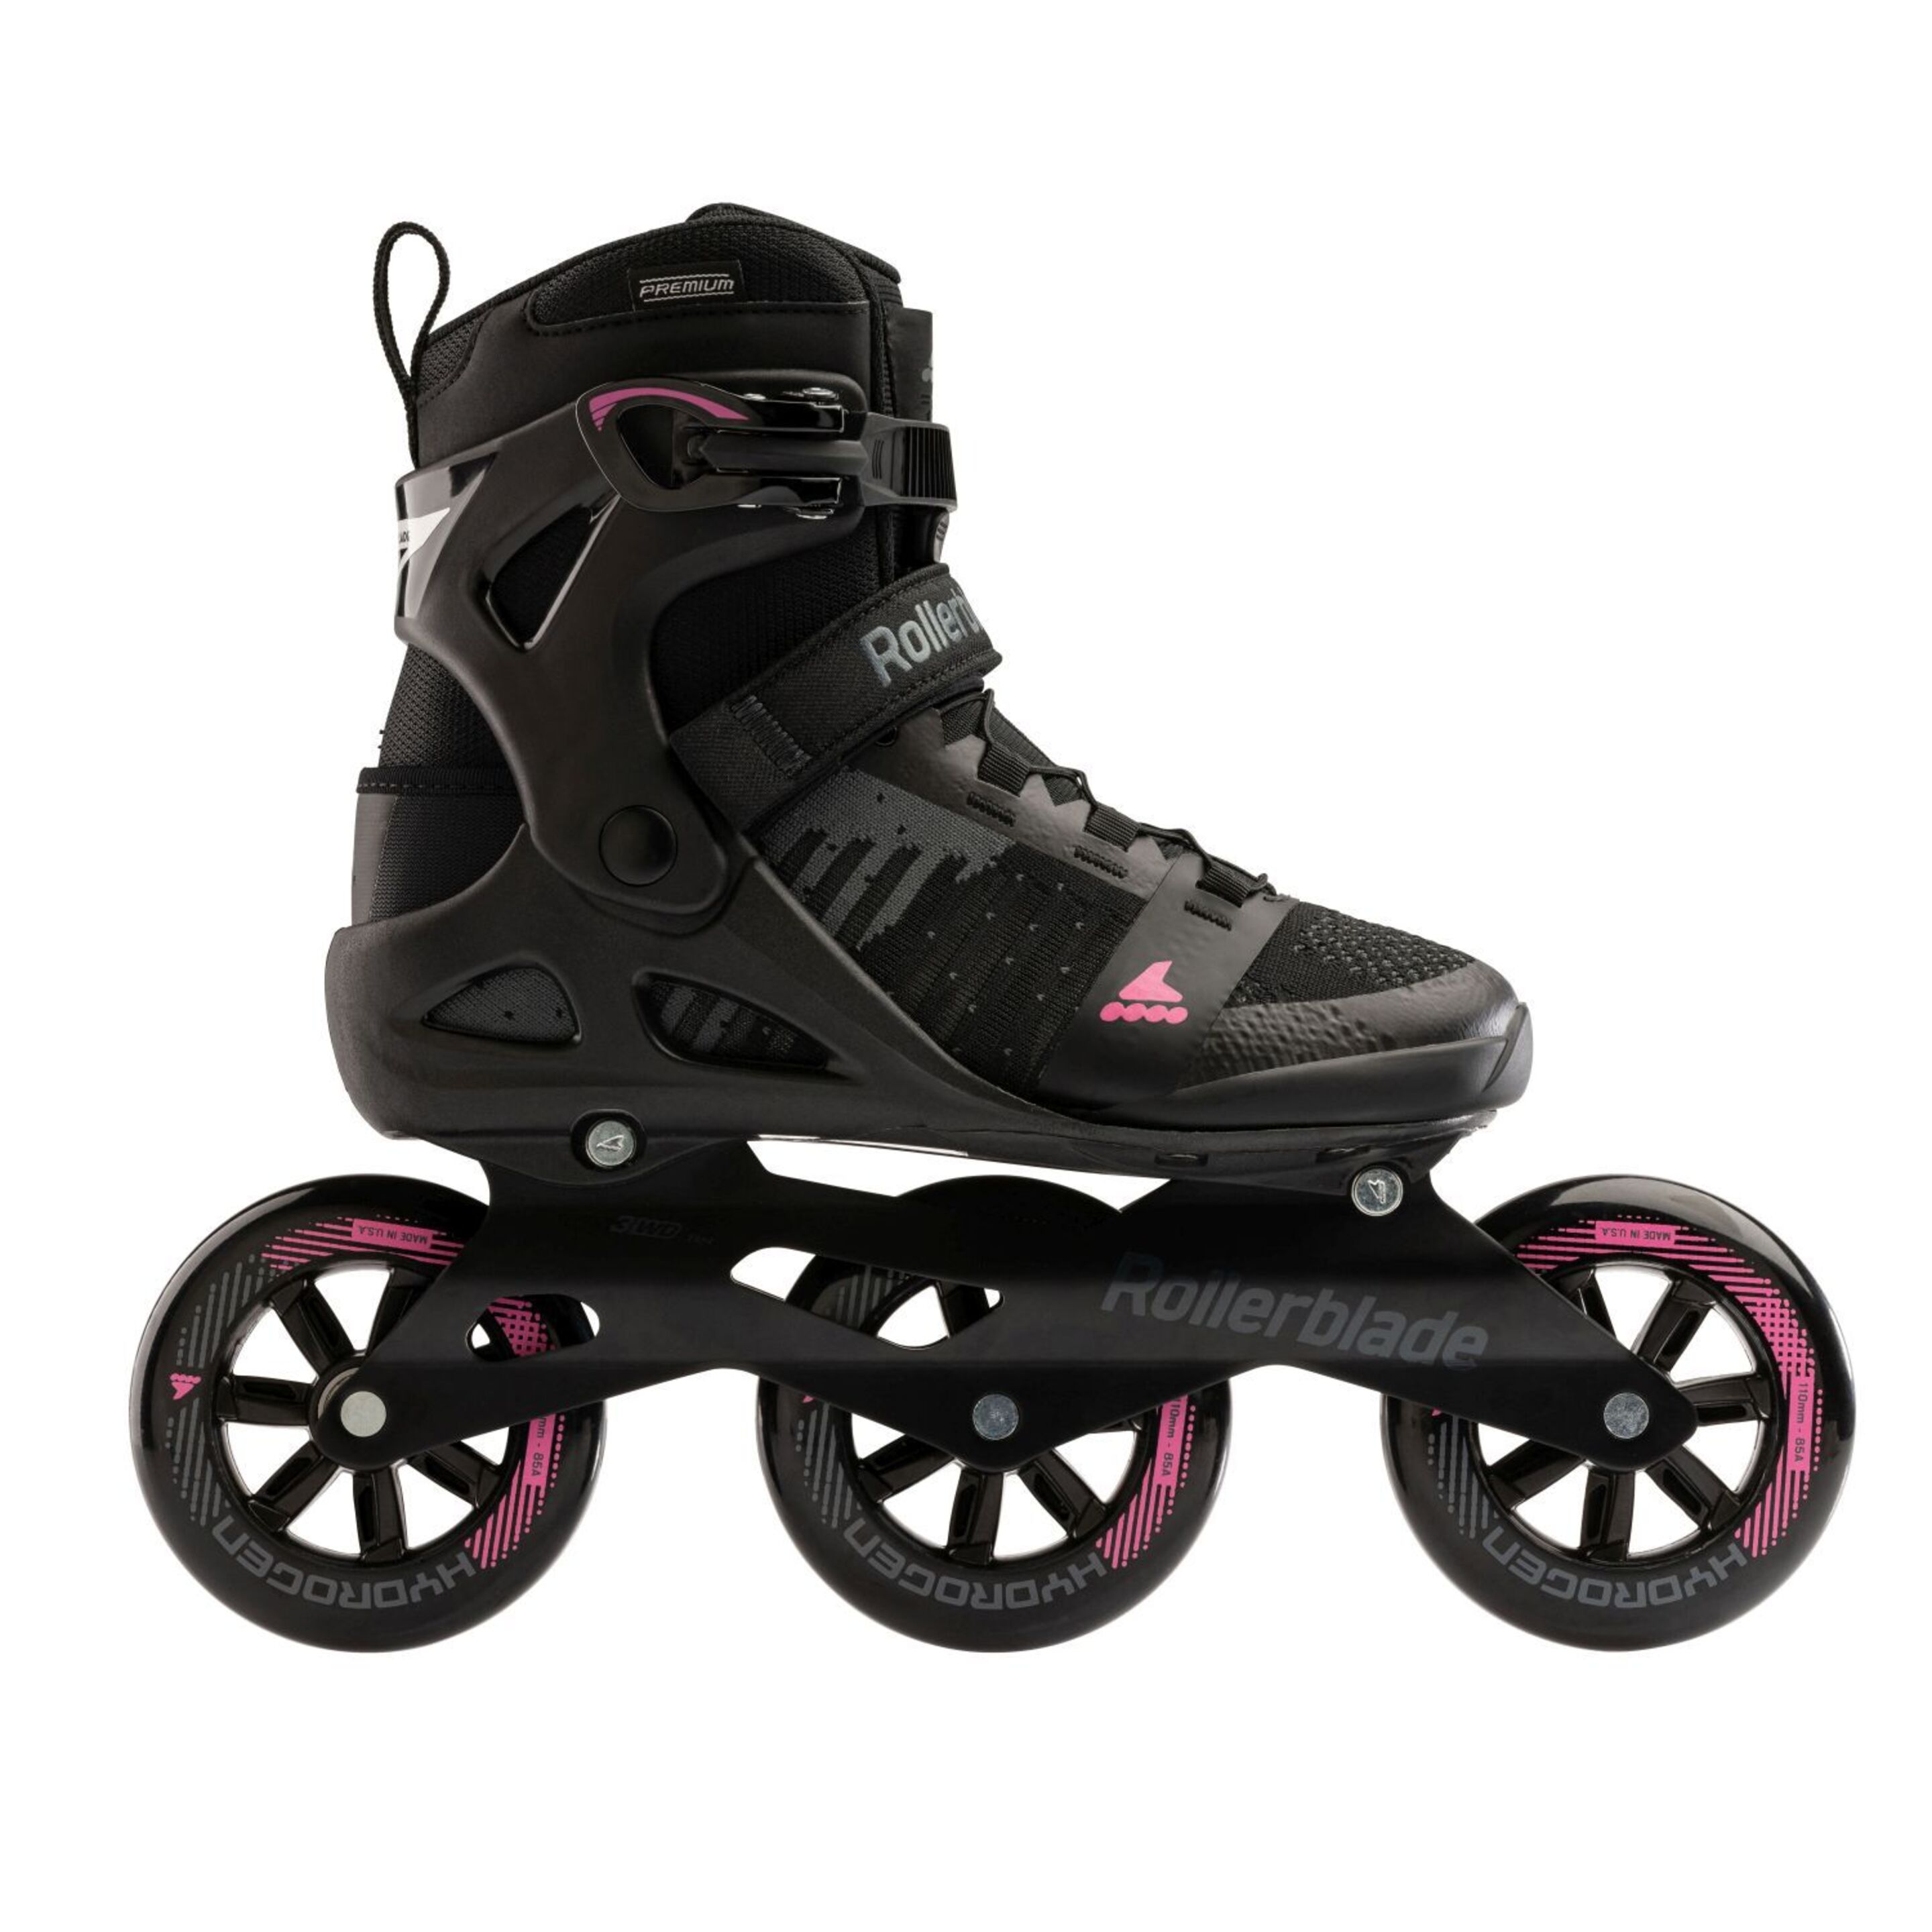 Patines Macroblade 110 3wd W Rollerblade